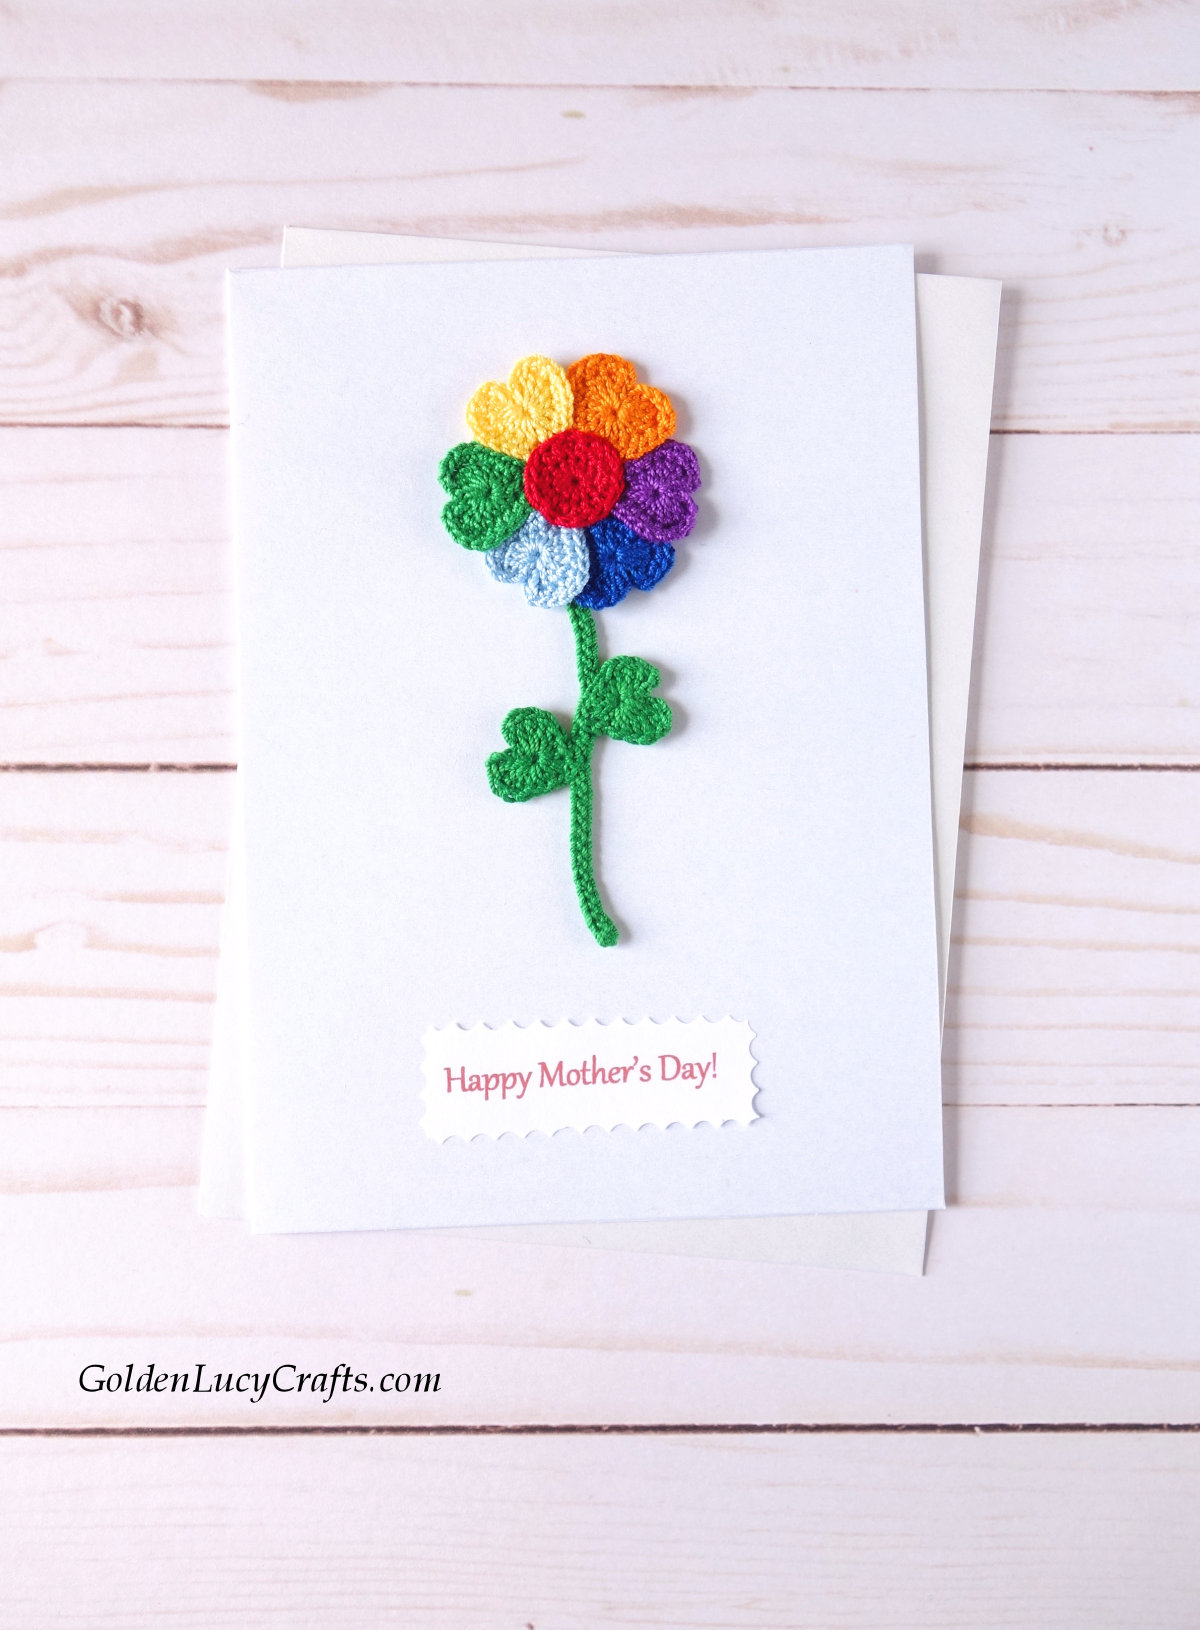 Mother's Day handmade card with crocheted flower applique.